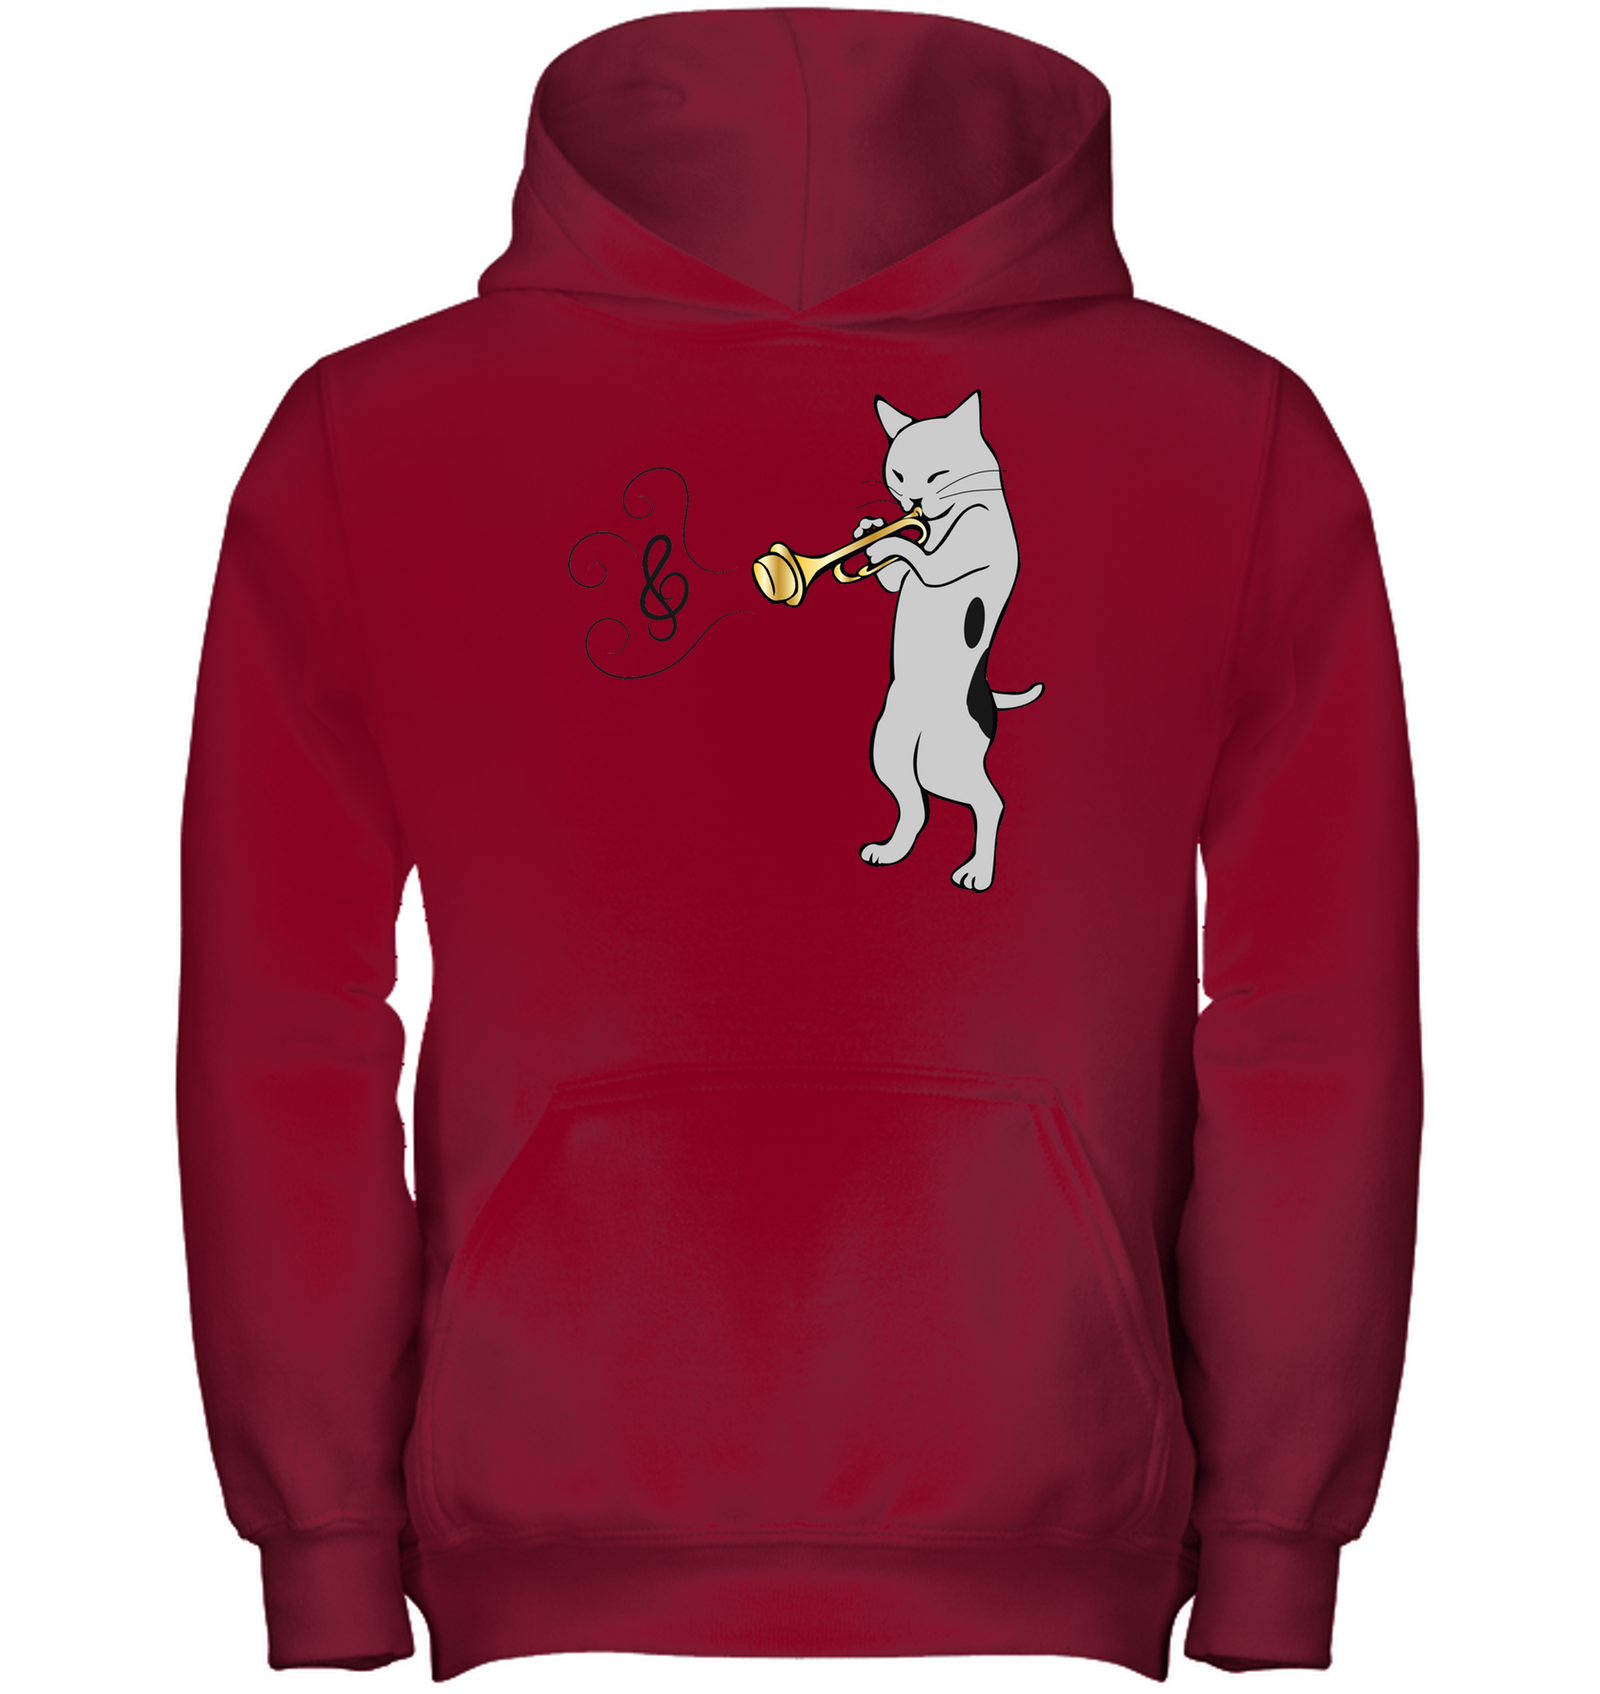 Cat with Trumpet - Gildan Youth Heavyweight Pullover Hoodie